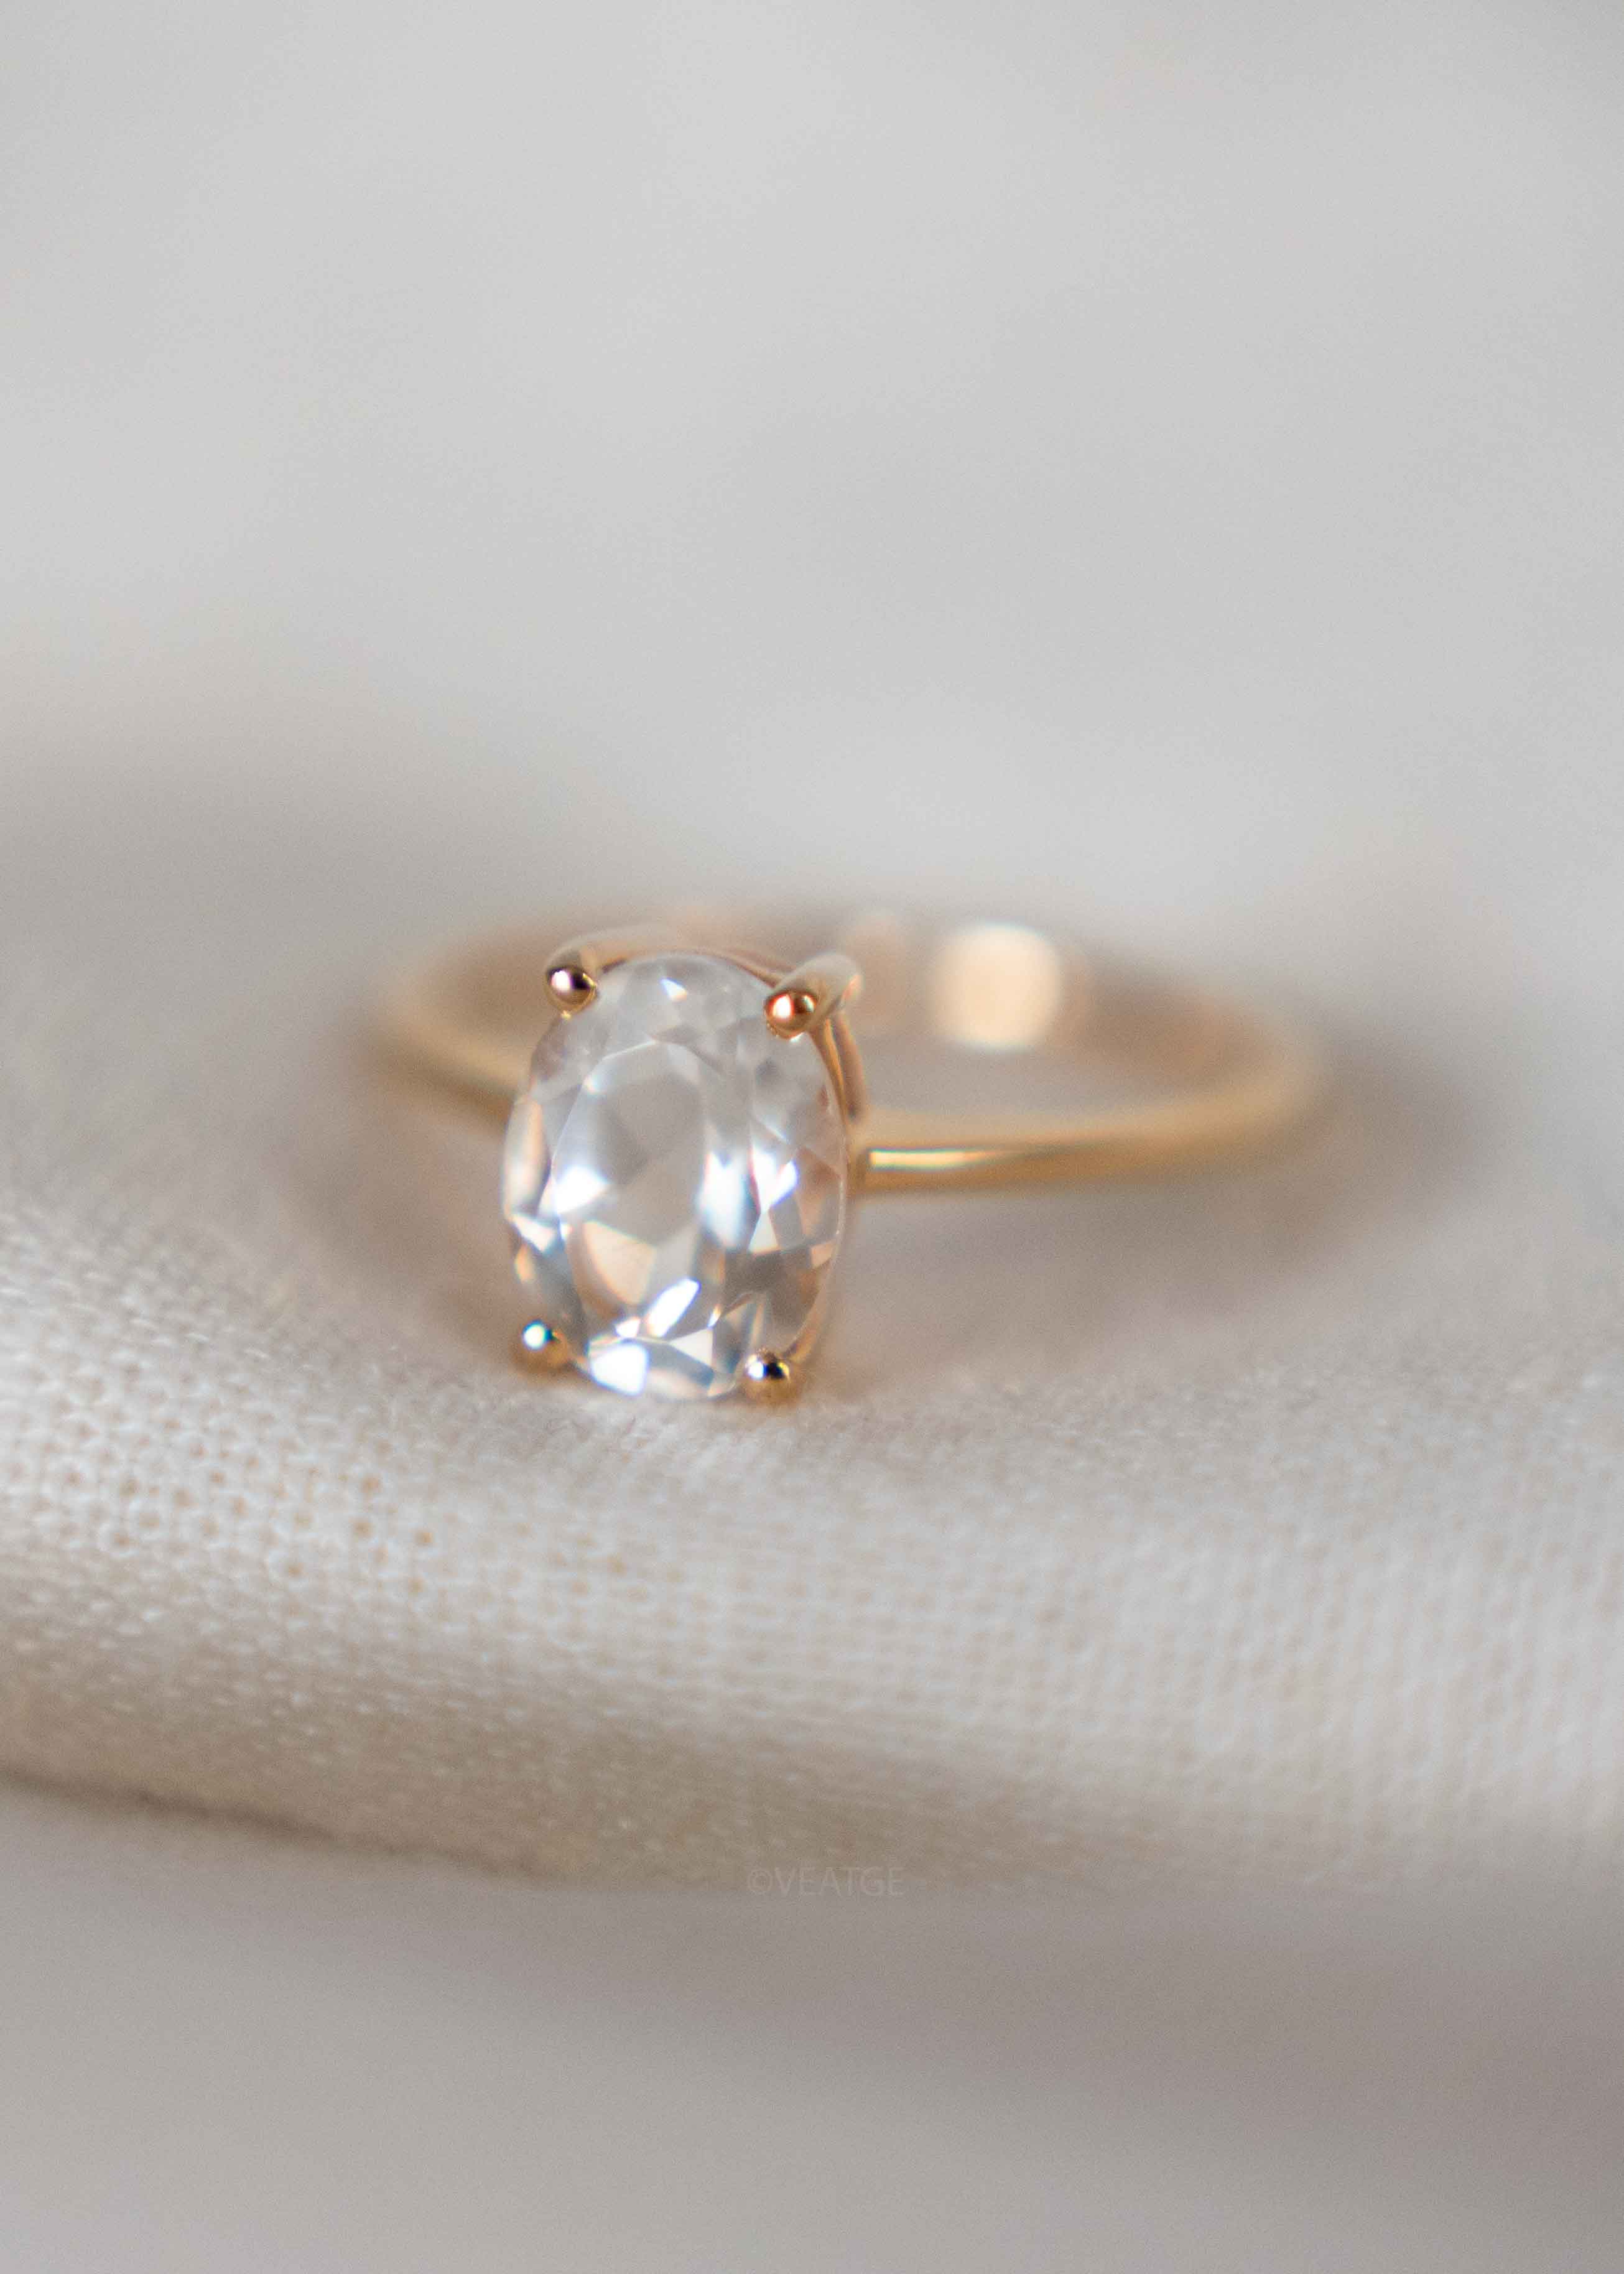 Genuine White Topaz Ring, Oval Solitaire Gold Promise Ring, alternative wedding rings for her, April Birthstone, Gifts for Her